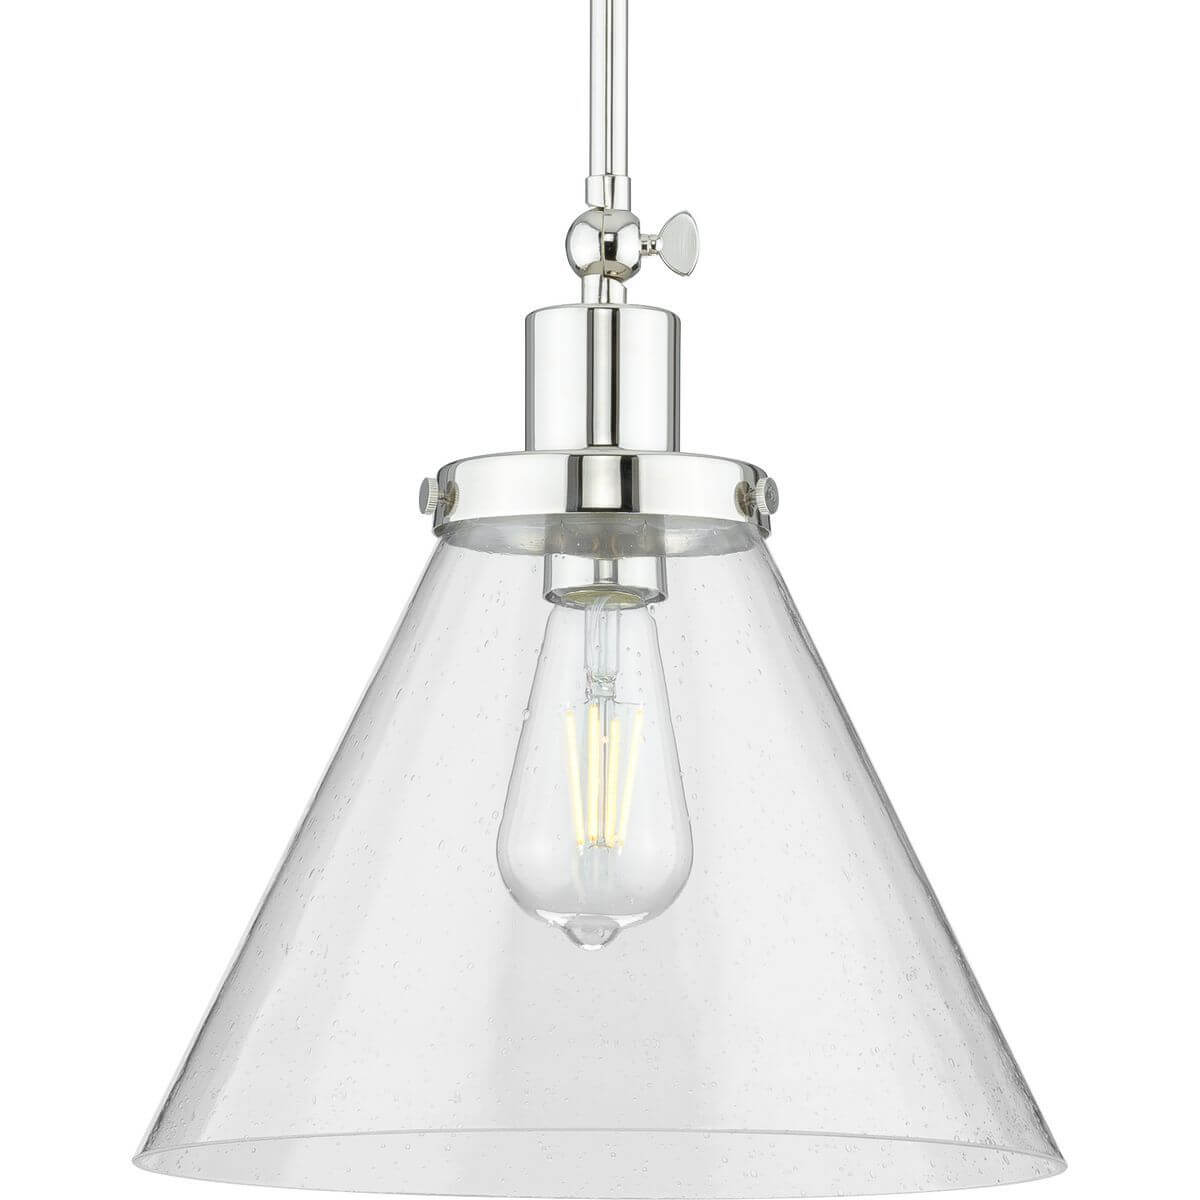 Progress Lighting Hinton 1 Light 12 inch Pendant in Polished Nickel with Clear Seeded Glass P500324-104